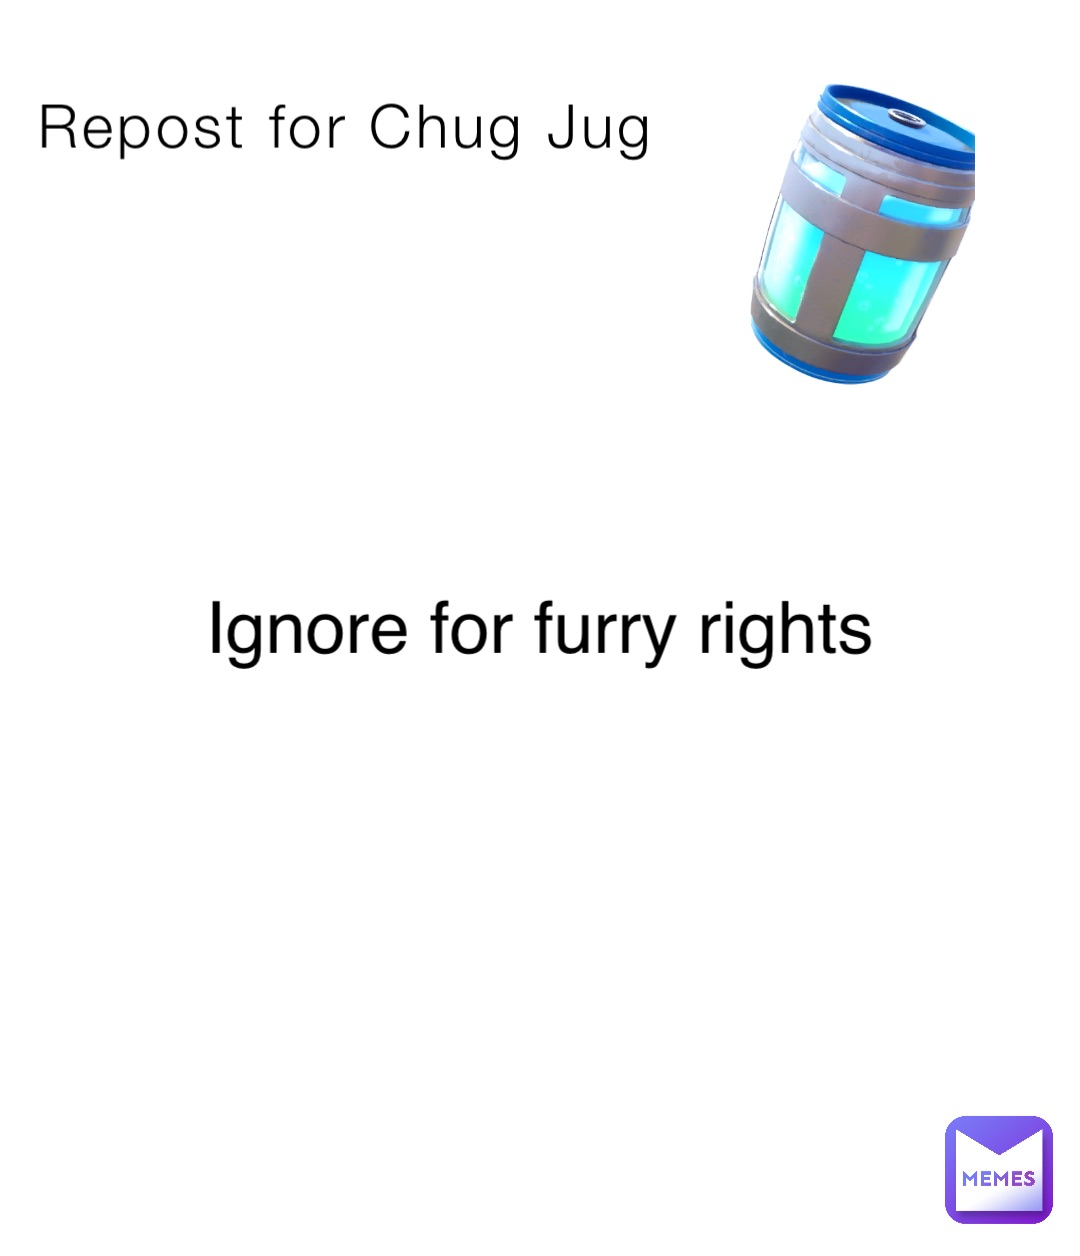 Repost for Chug Jug Ignore for furry rights